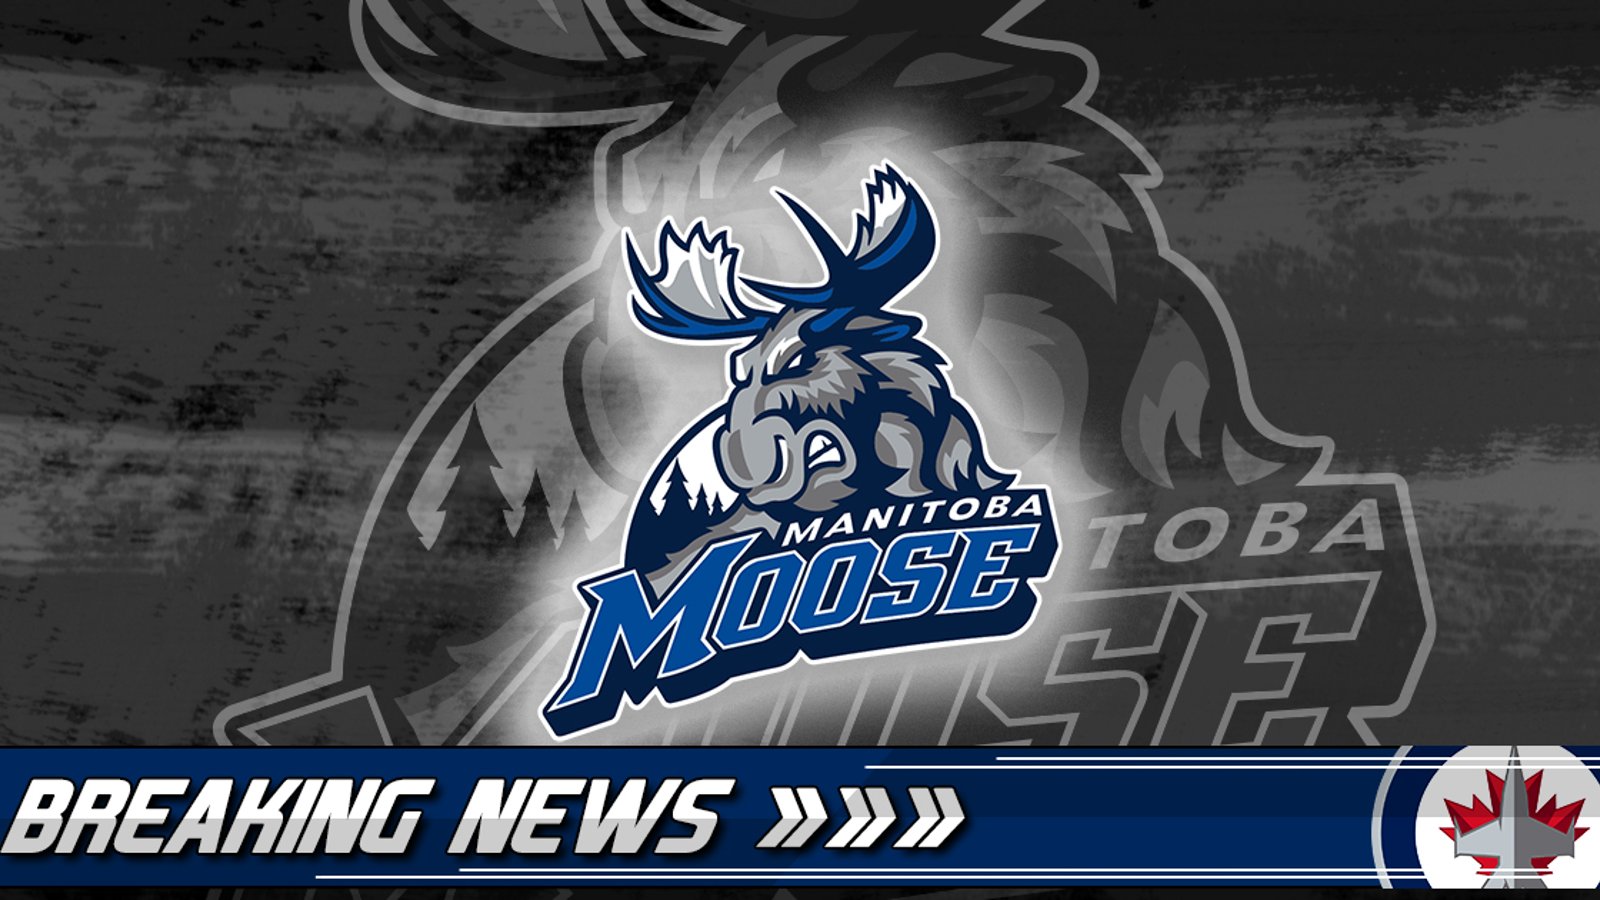 Breaking: Emergency Recall as another Manitoba Moose d-man joins the team.